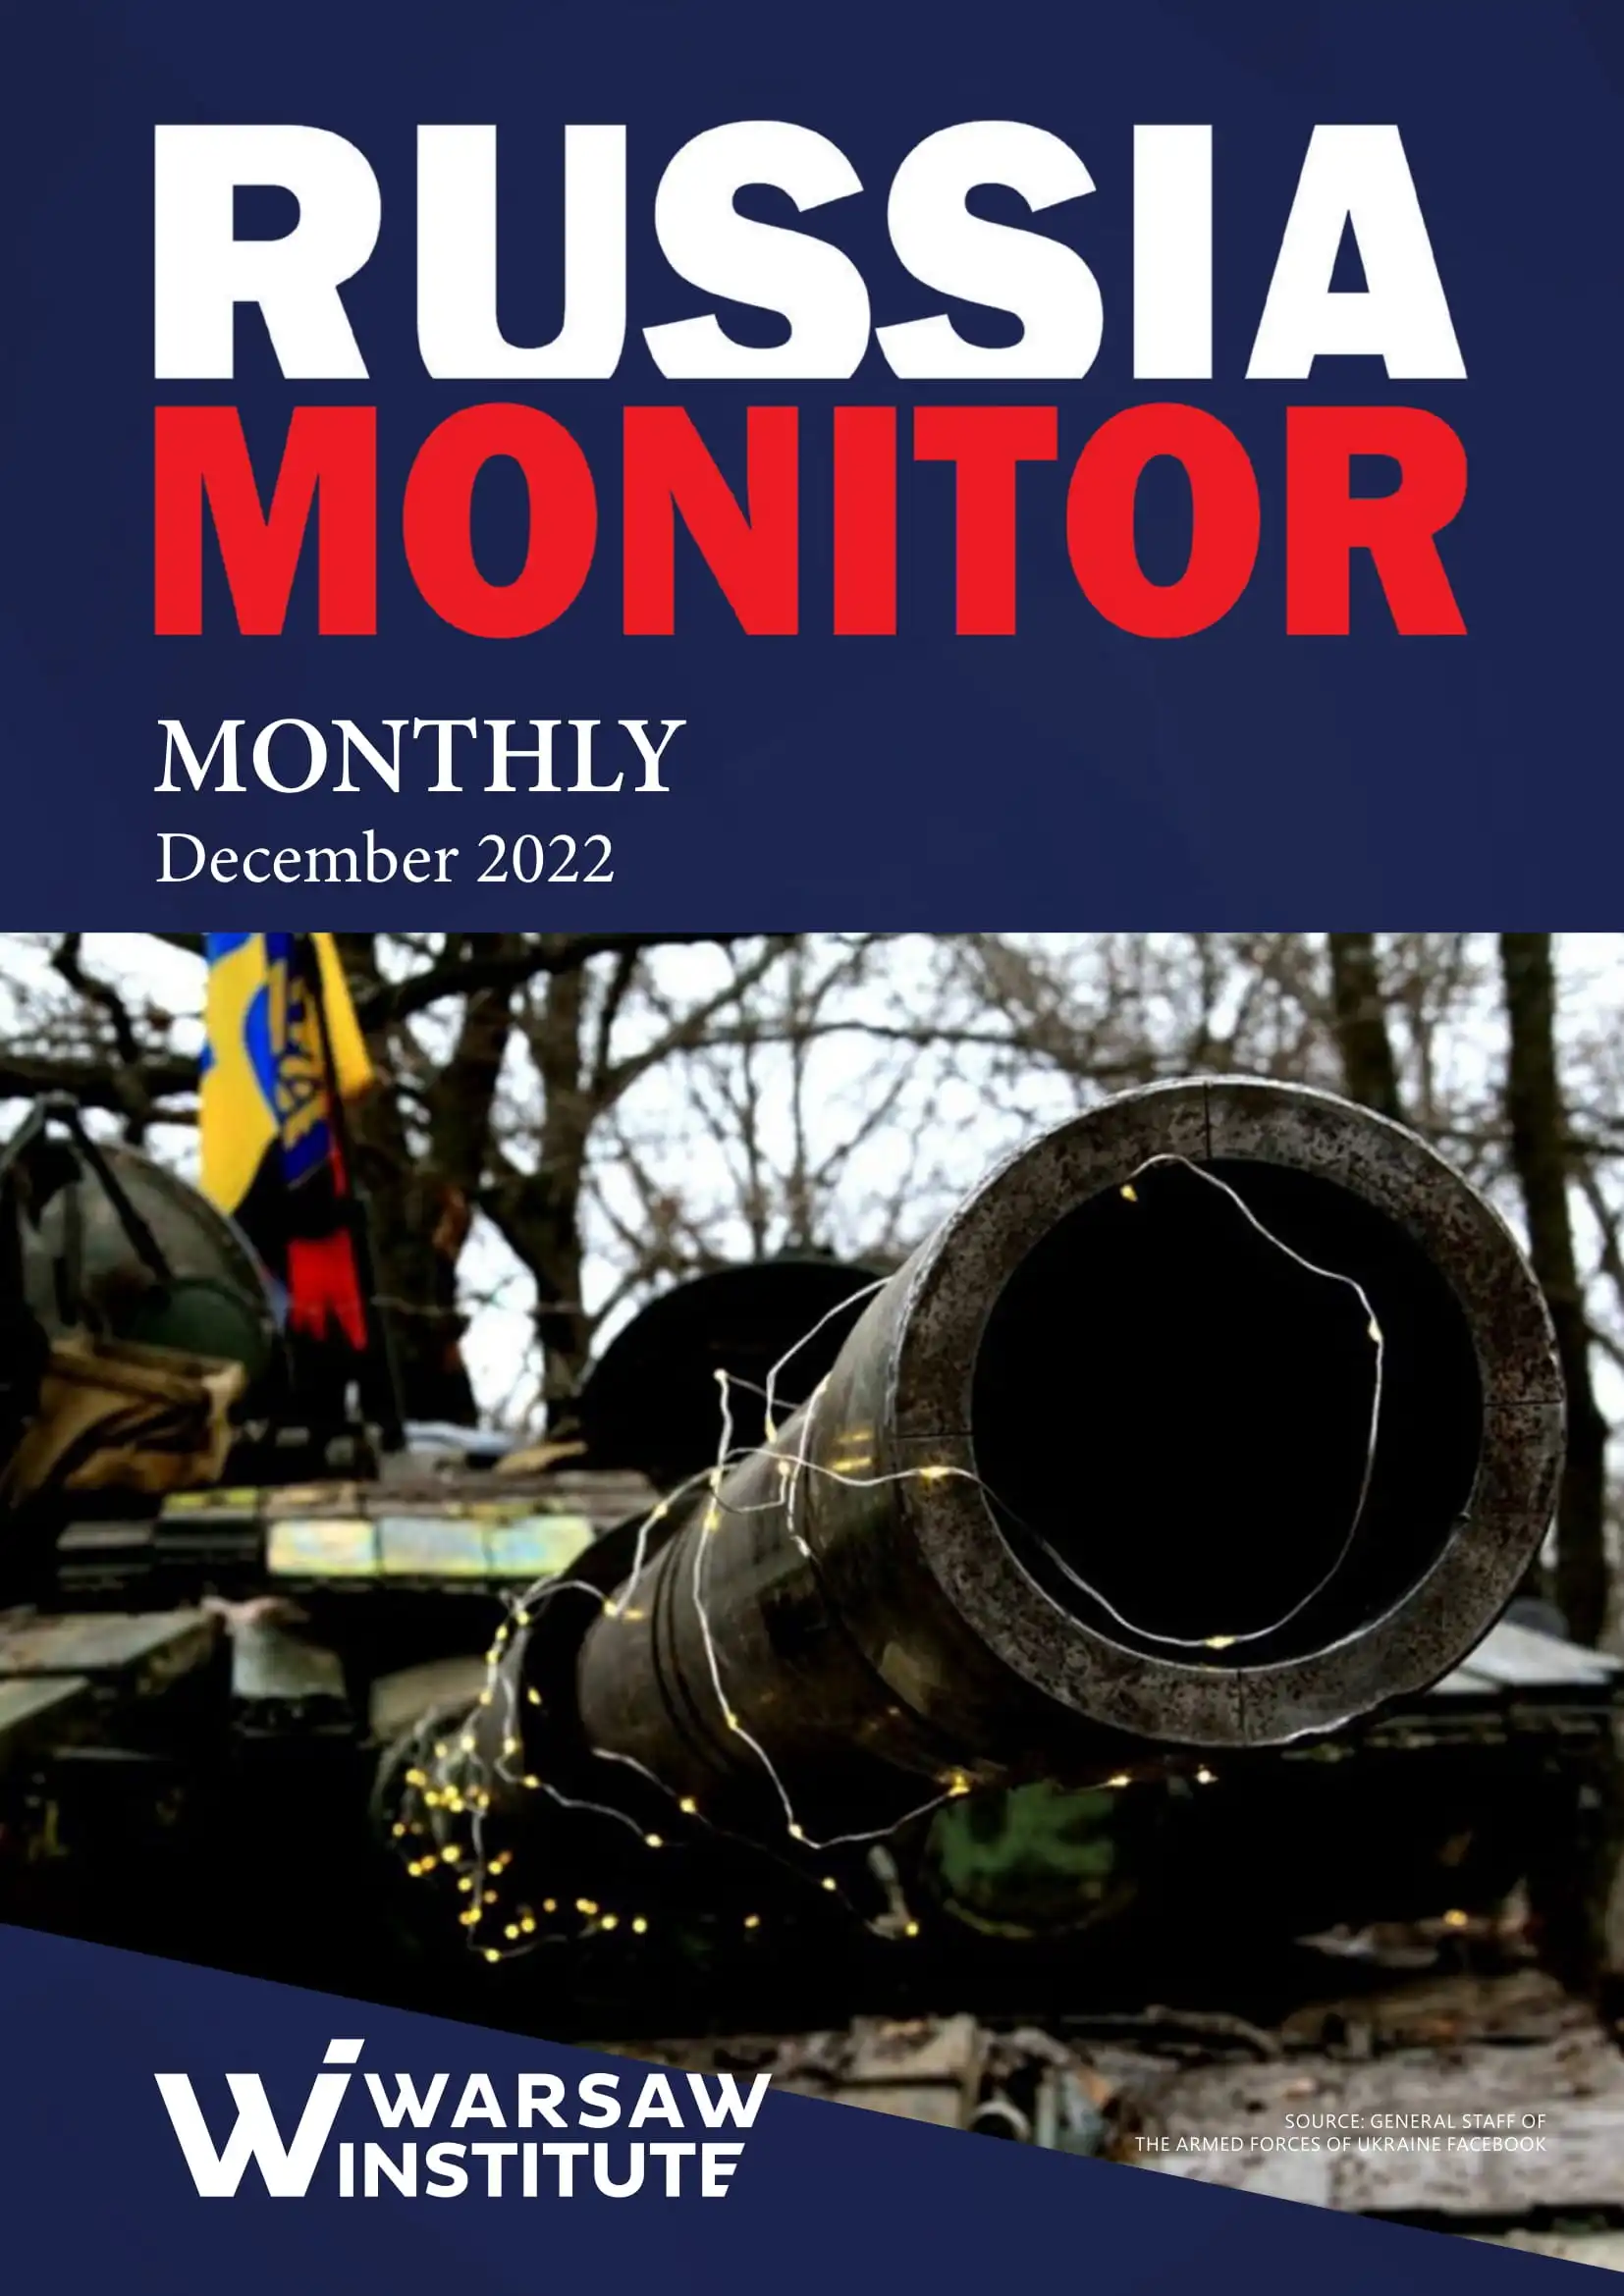 Russia Monitor Monthly 12/22